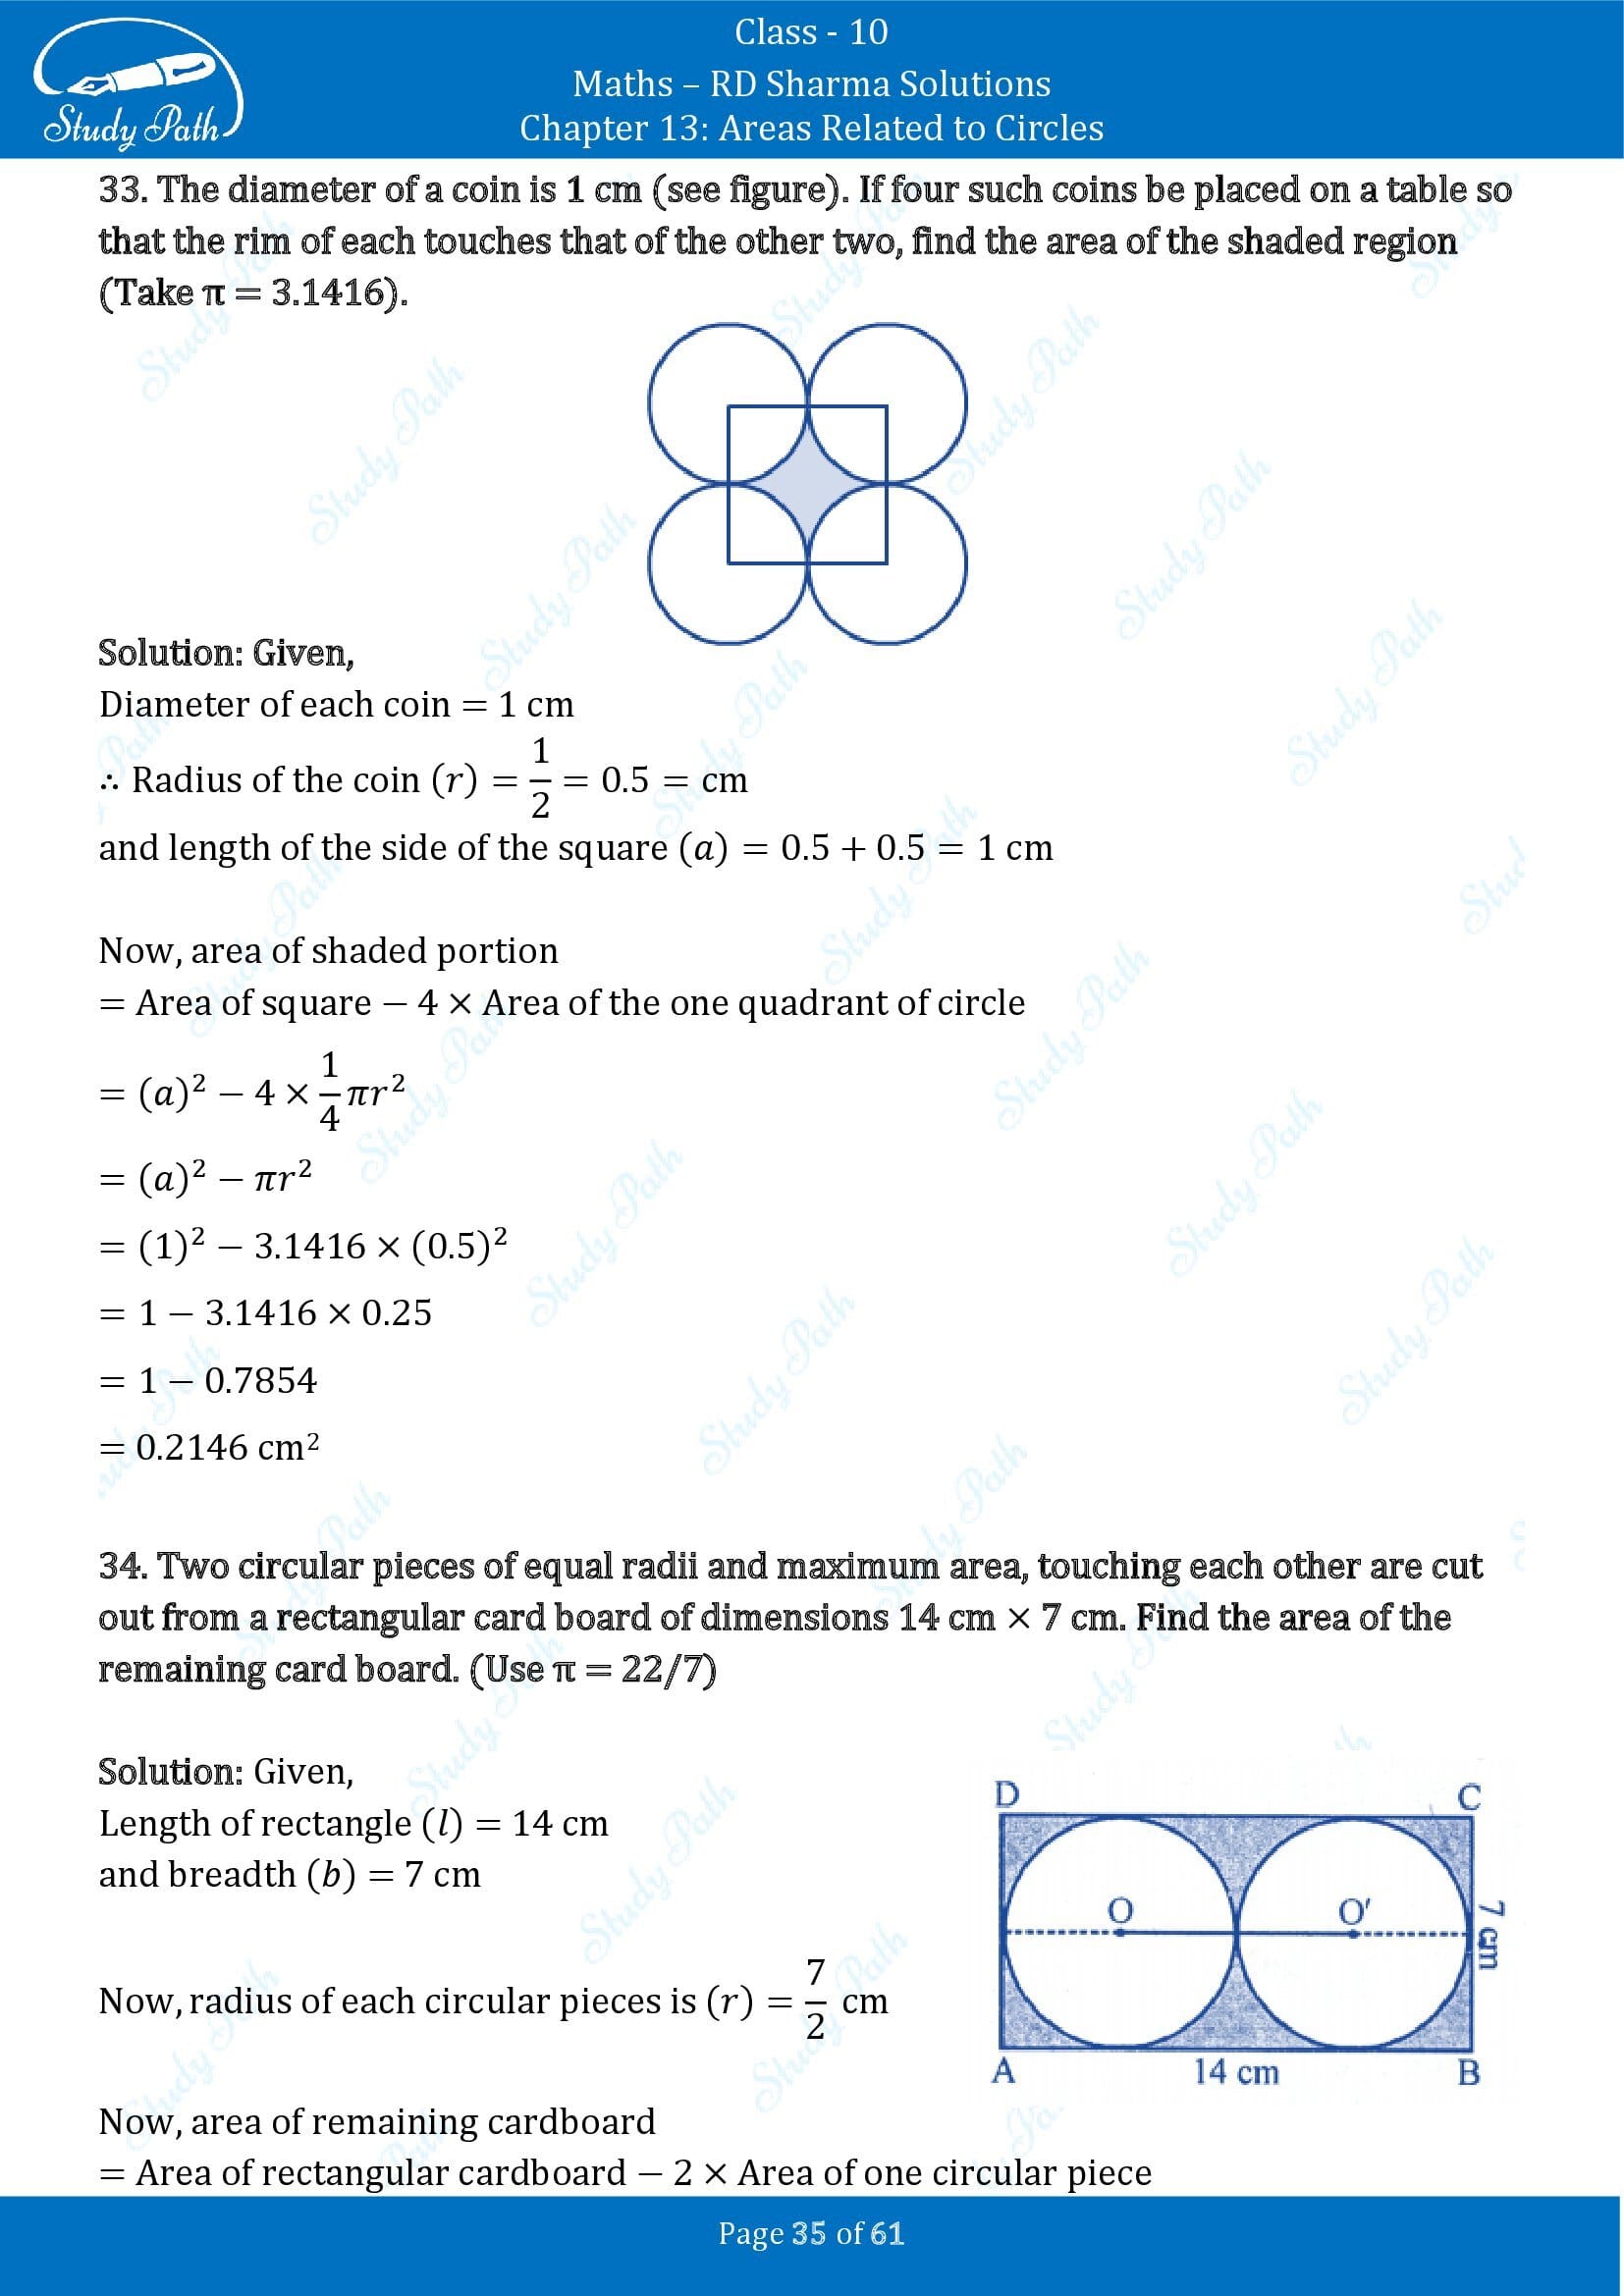 RD Sharma Solutions Class 10 Chapter 13 Areas Related to Circles Exercise 13.4 00035